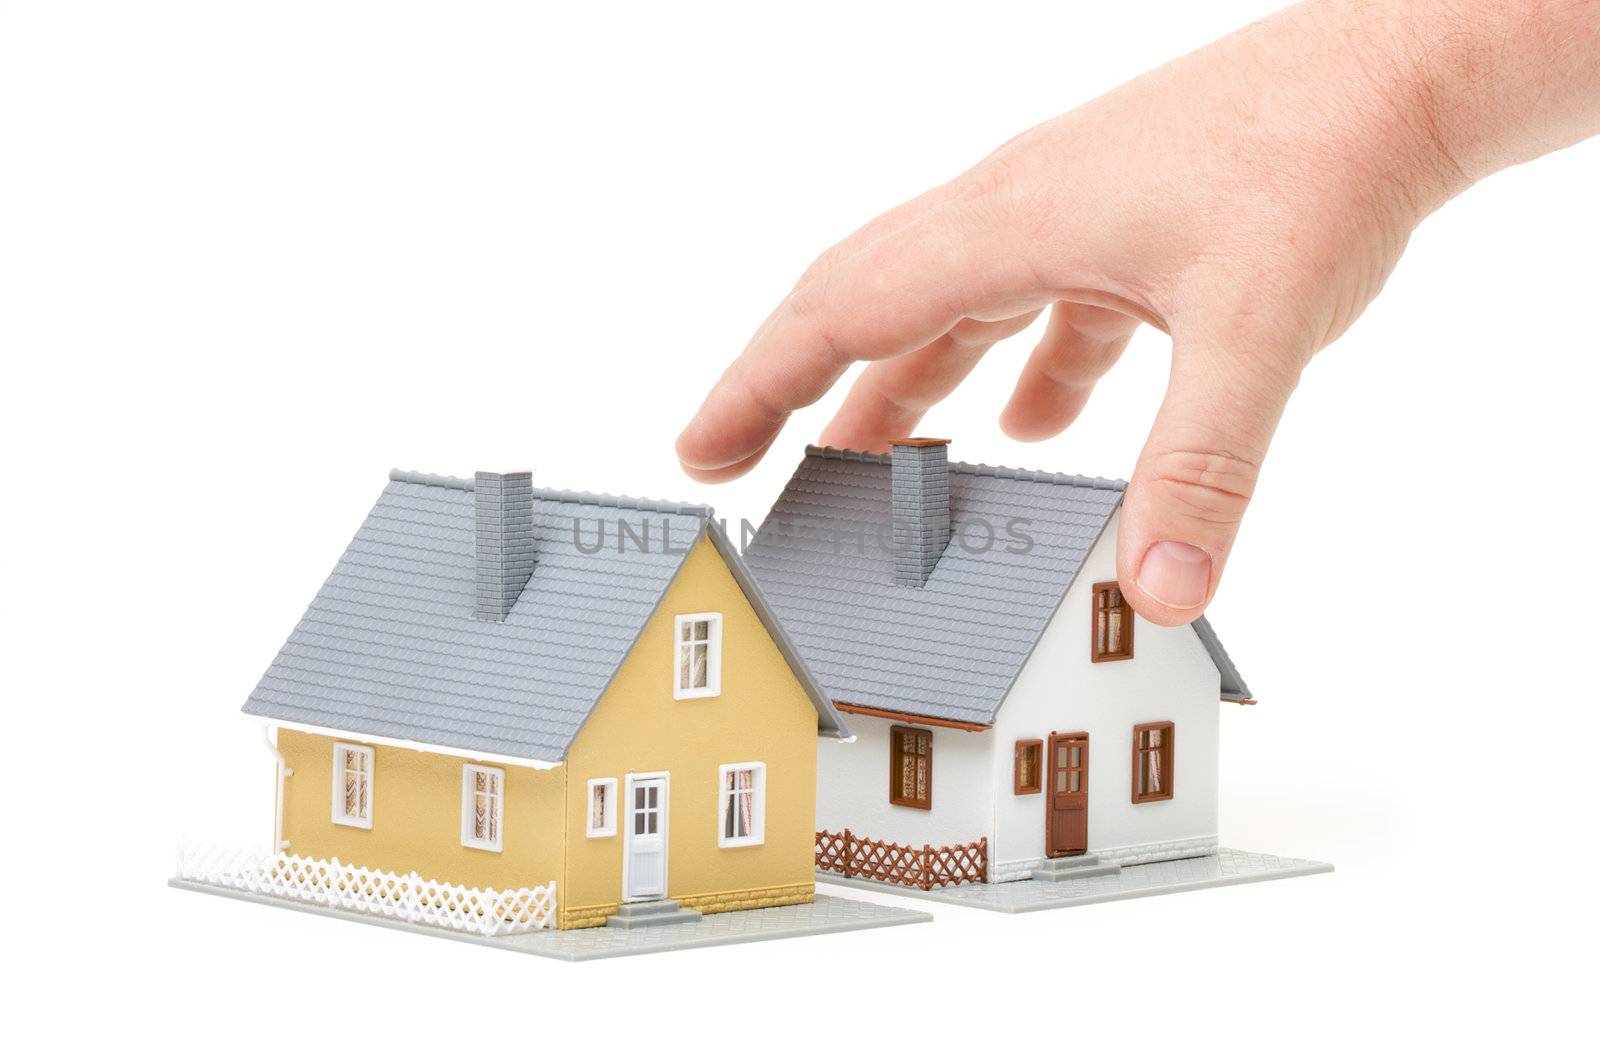 Male hand reaching for house isolated on a white background.